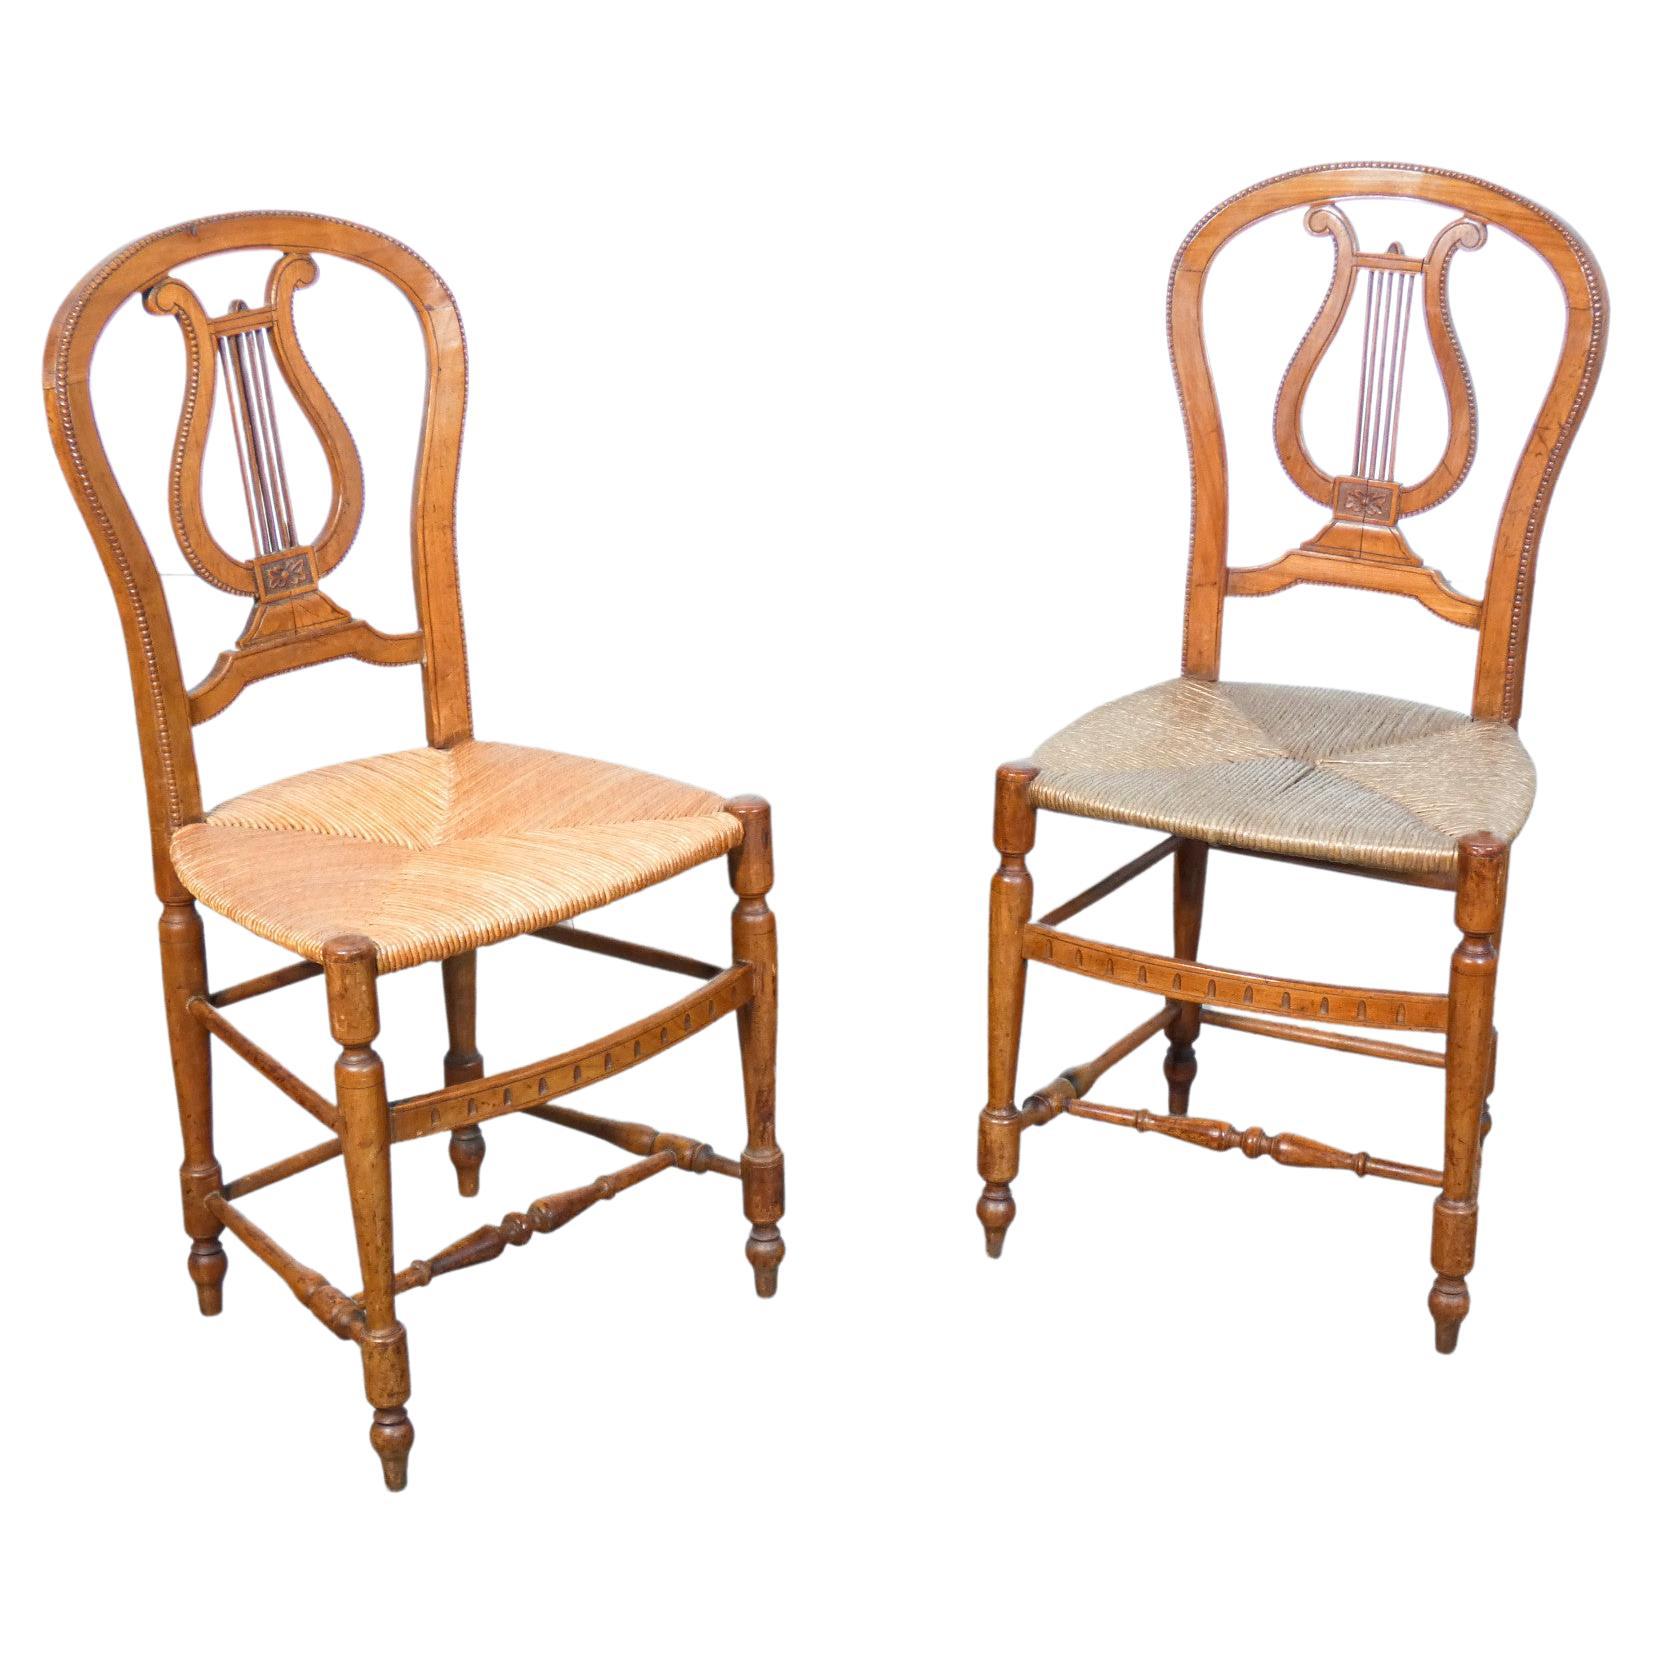 Pair of Cherry Wood Chairs with Lyre-Shaped Back and Straw Seat, Early 20th For Sale